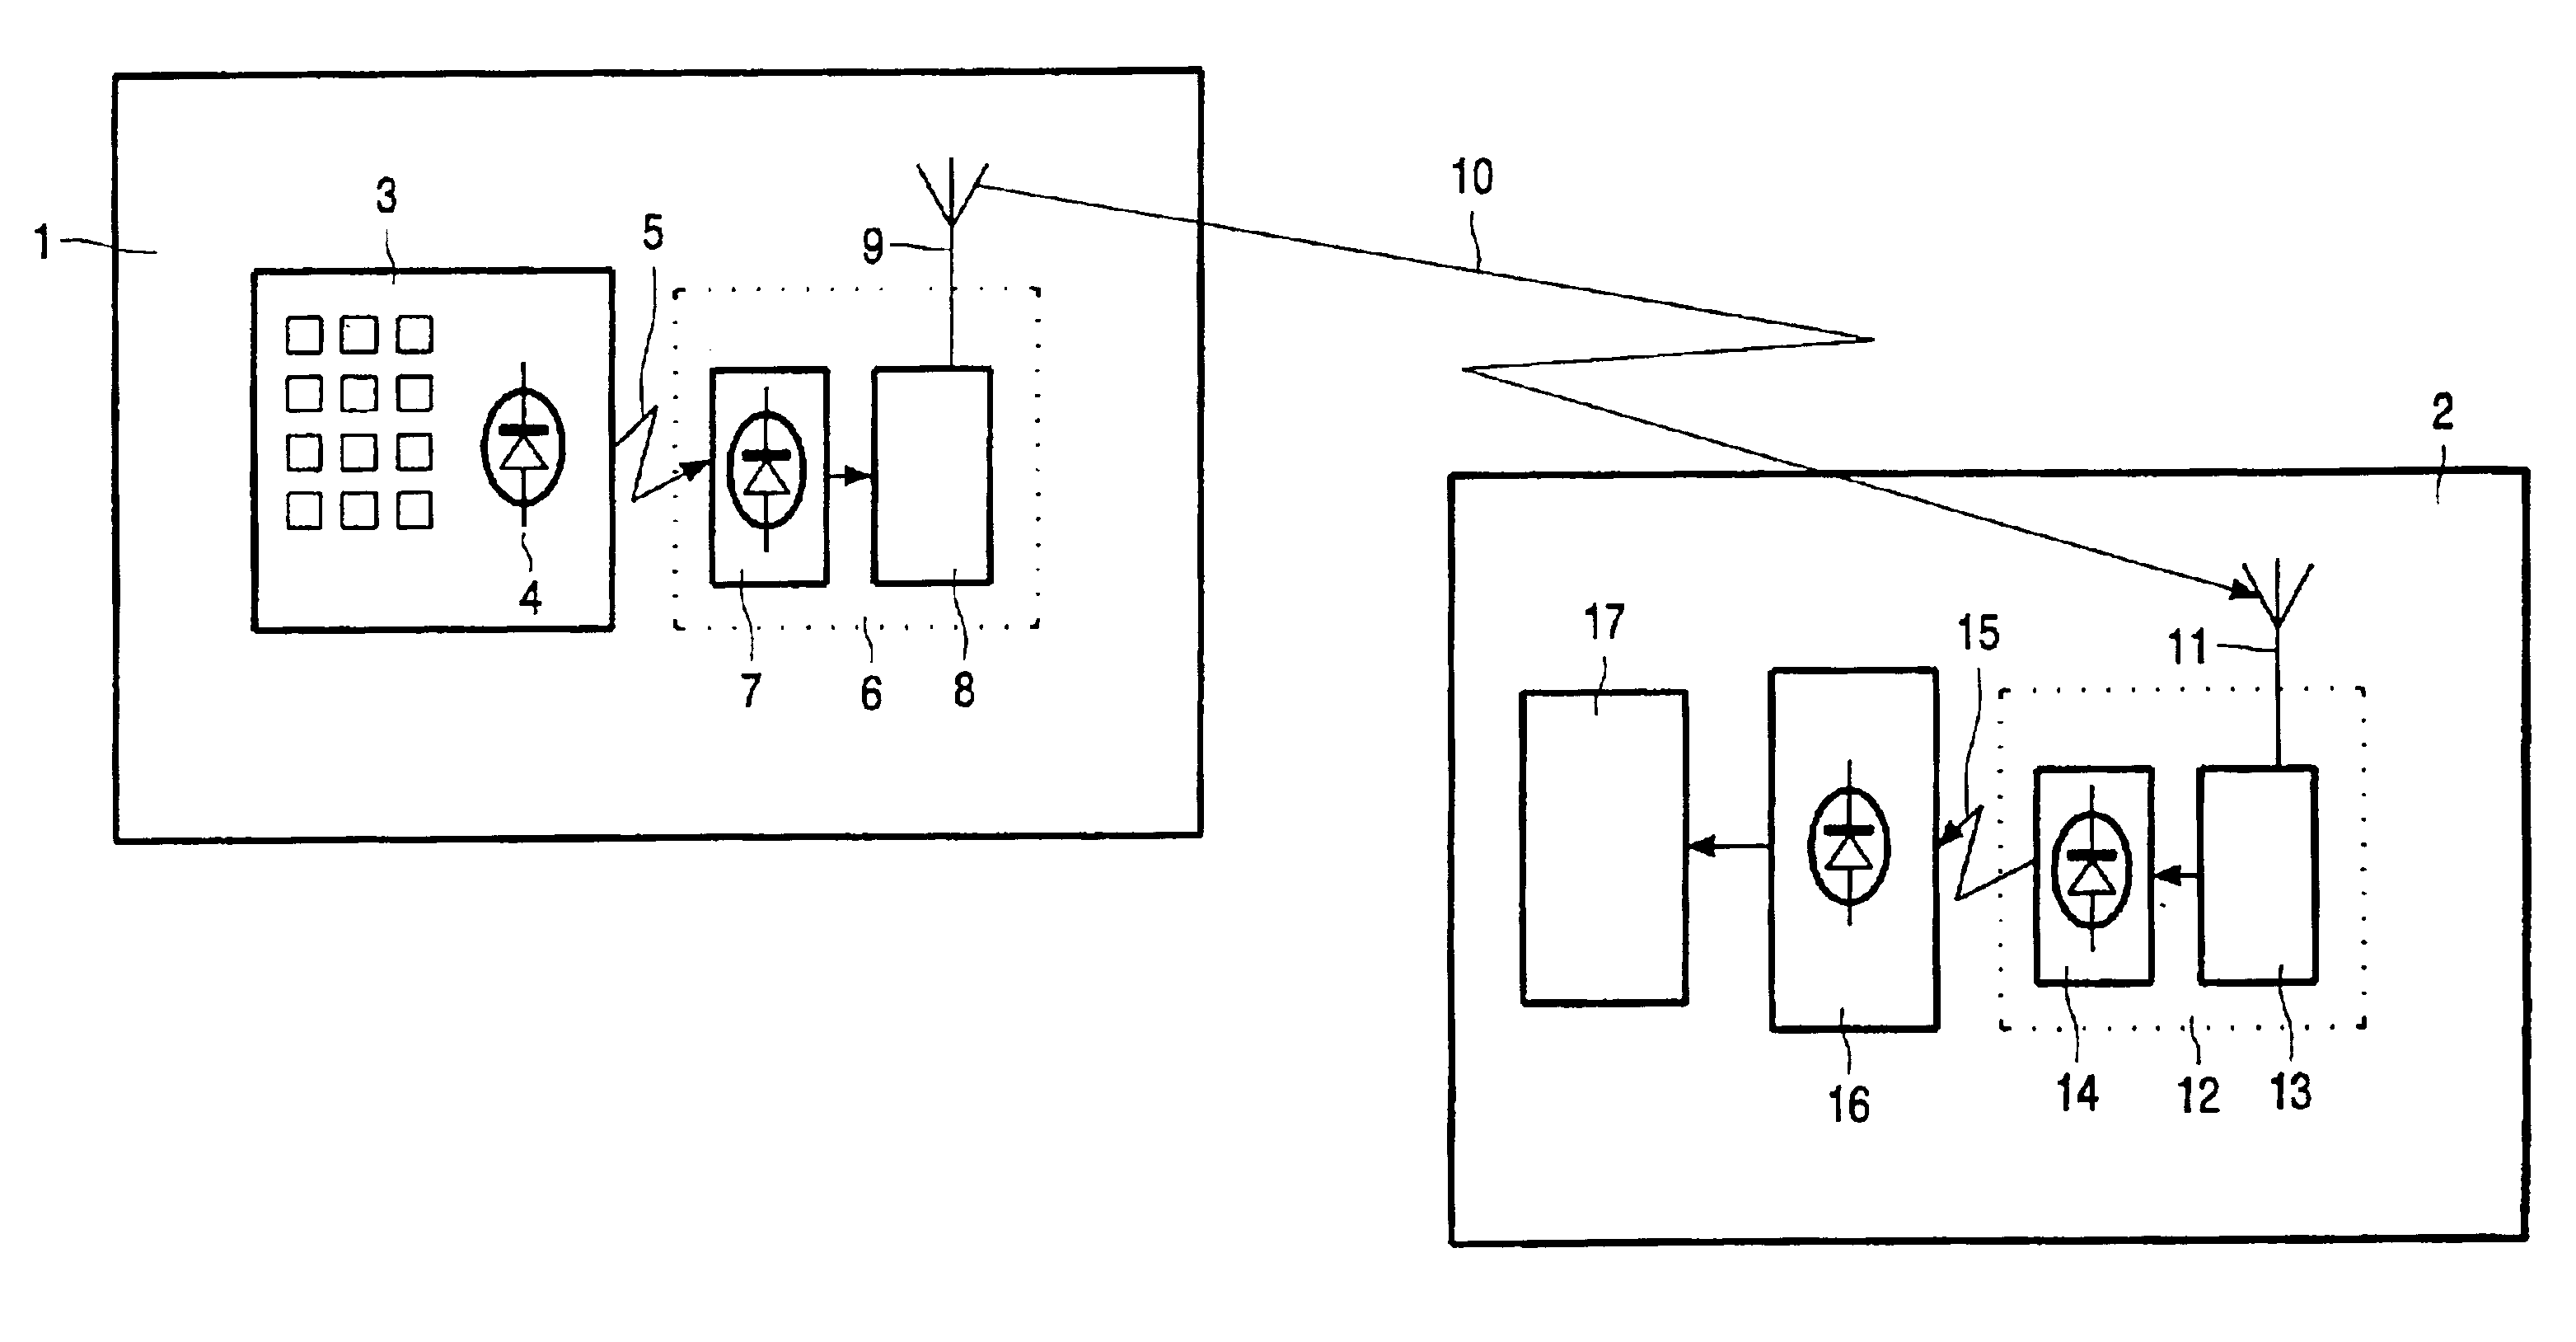 Method of operating a remote control system and a remote control system comprising an RF transmission and receiving system